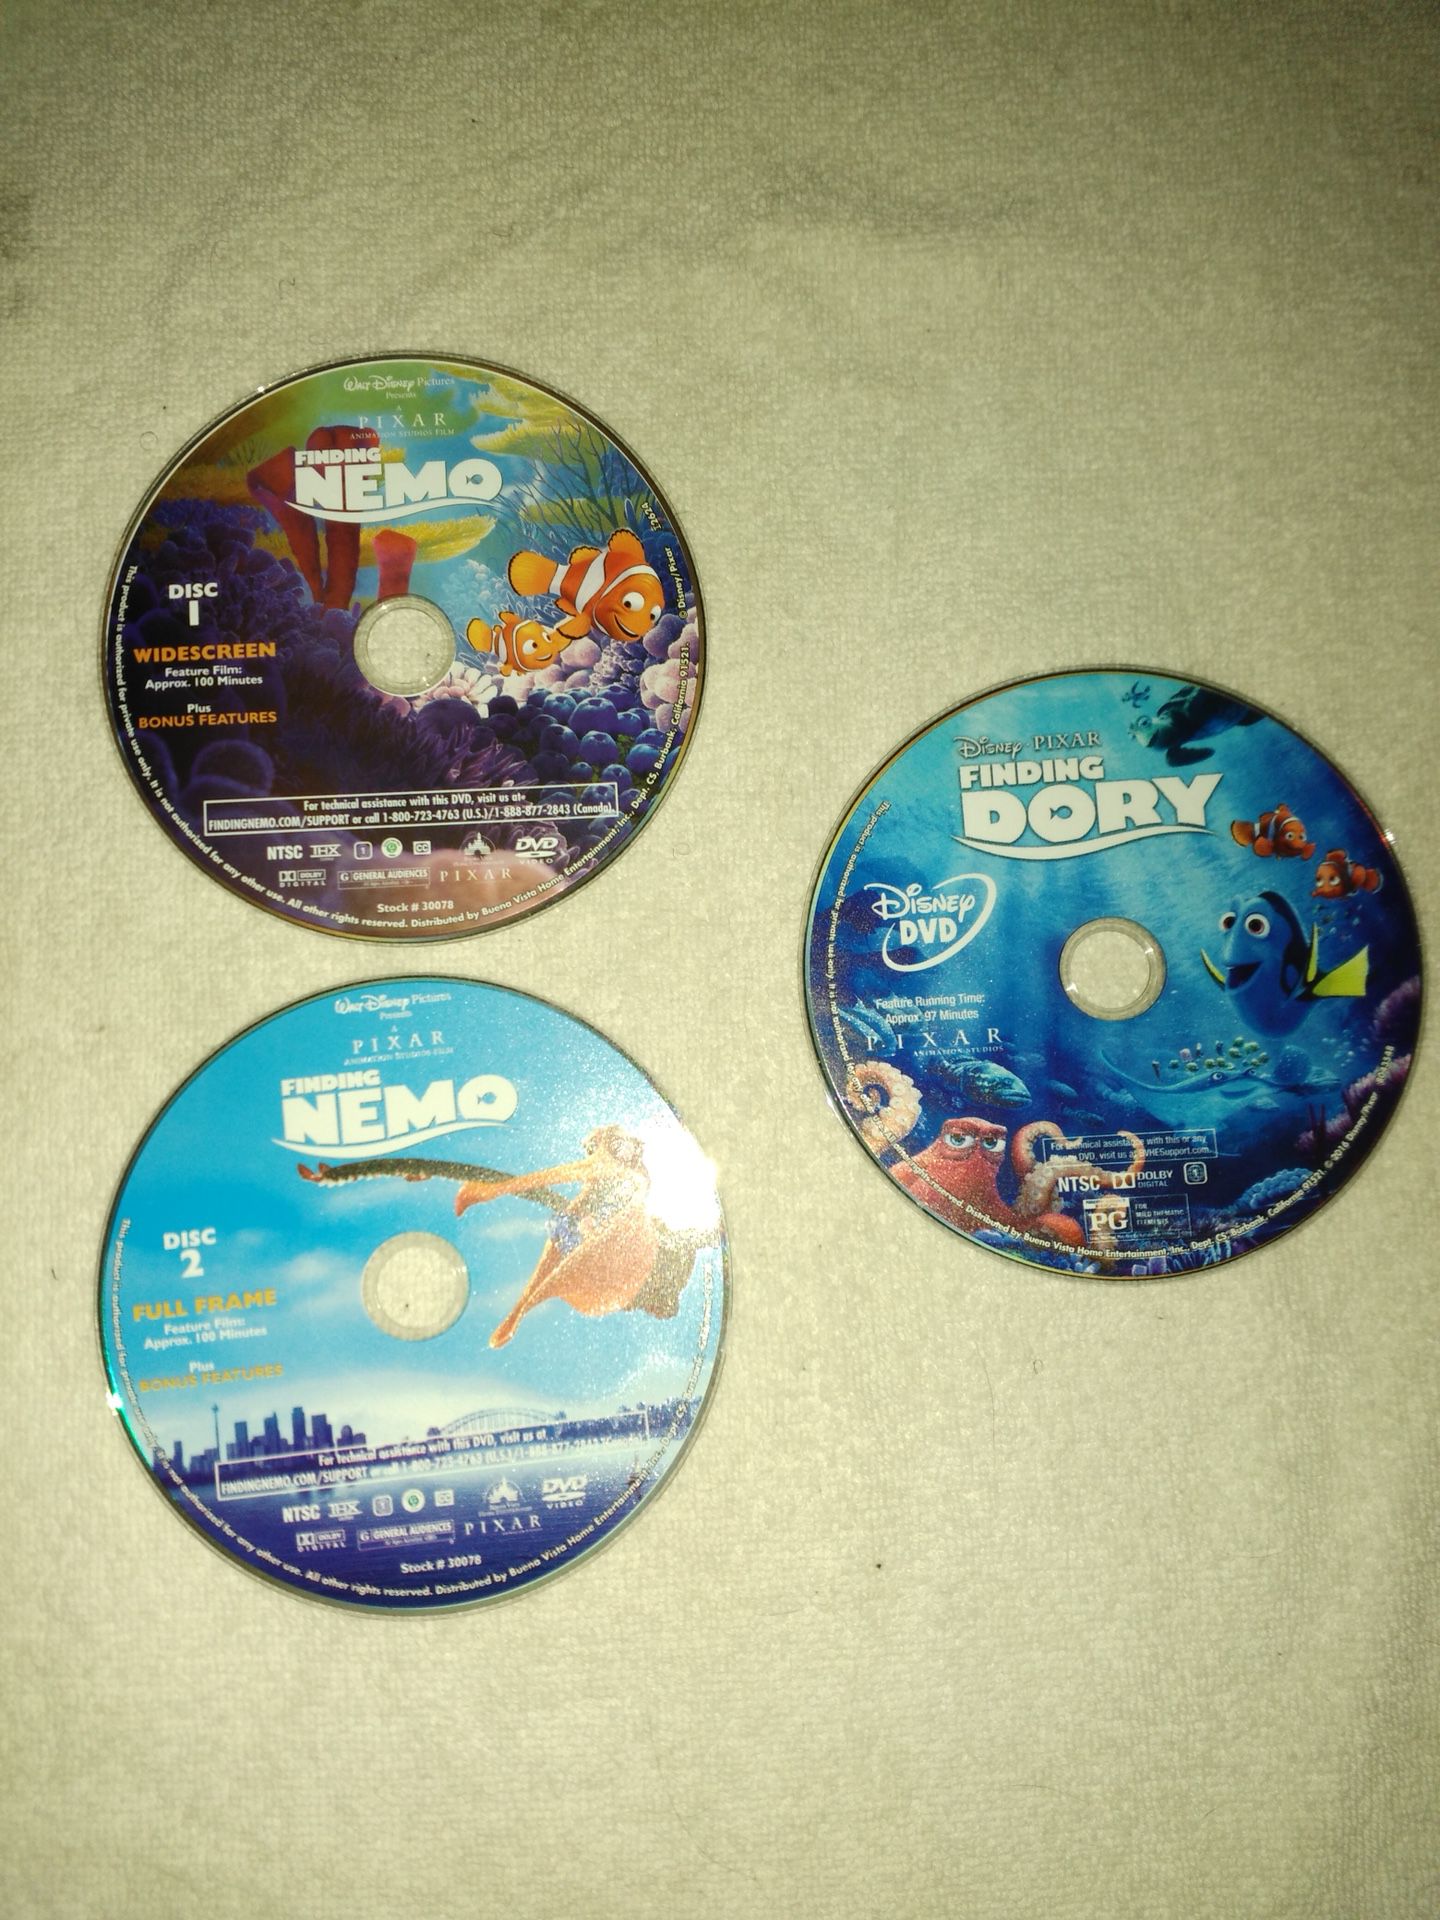 Finding Nemo 2 Disc Collectors Edition DVDs & Finding Dory DVD